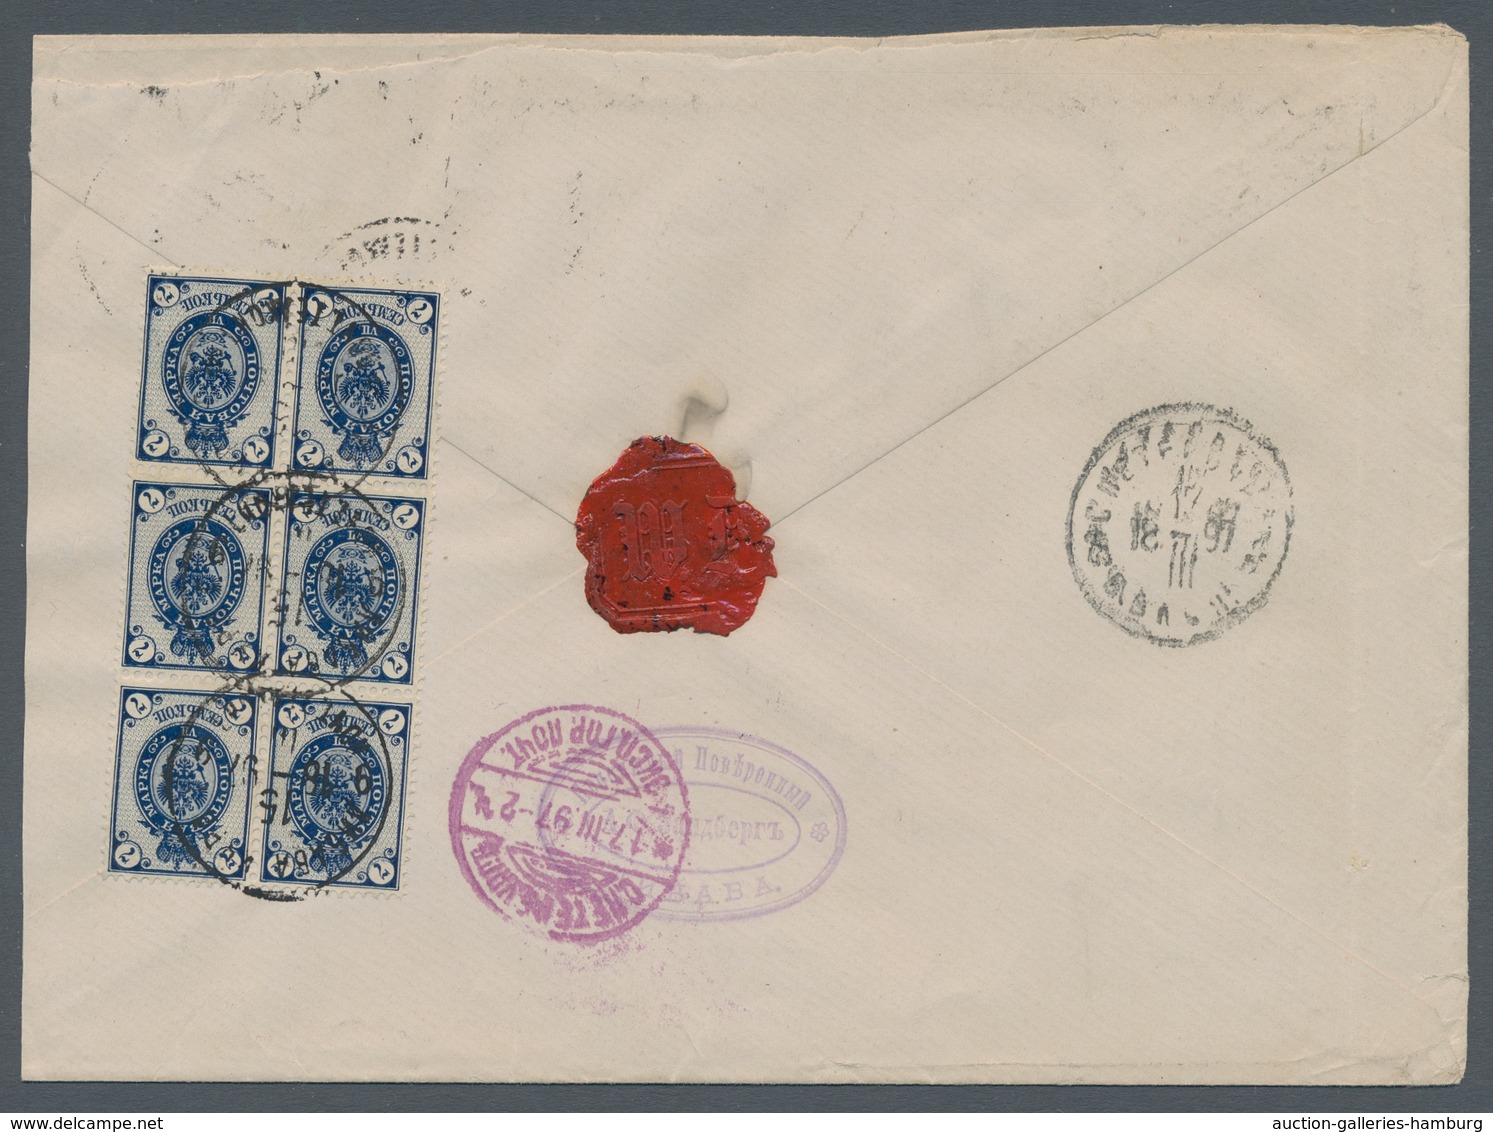 Lettland: 1897, Rs. Franked Two-sided Open R-letter From LIPAWA (Libau) 15 III 97 To St. Petersburg - Lettland